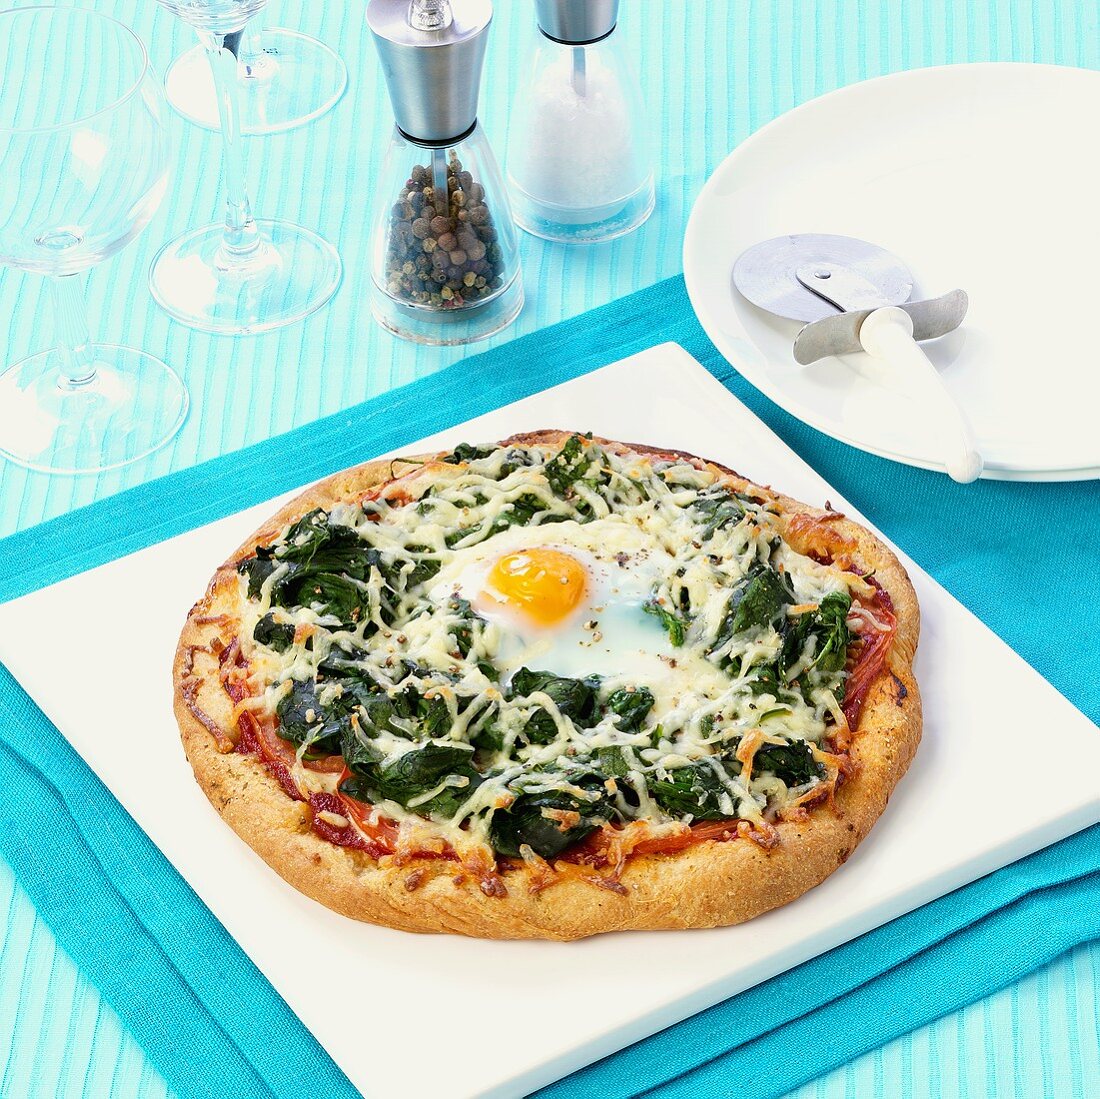 Spinach pizza with fried egg